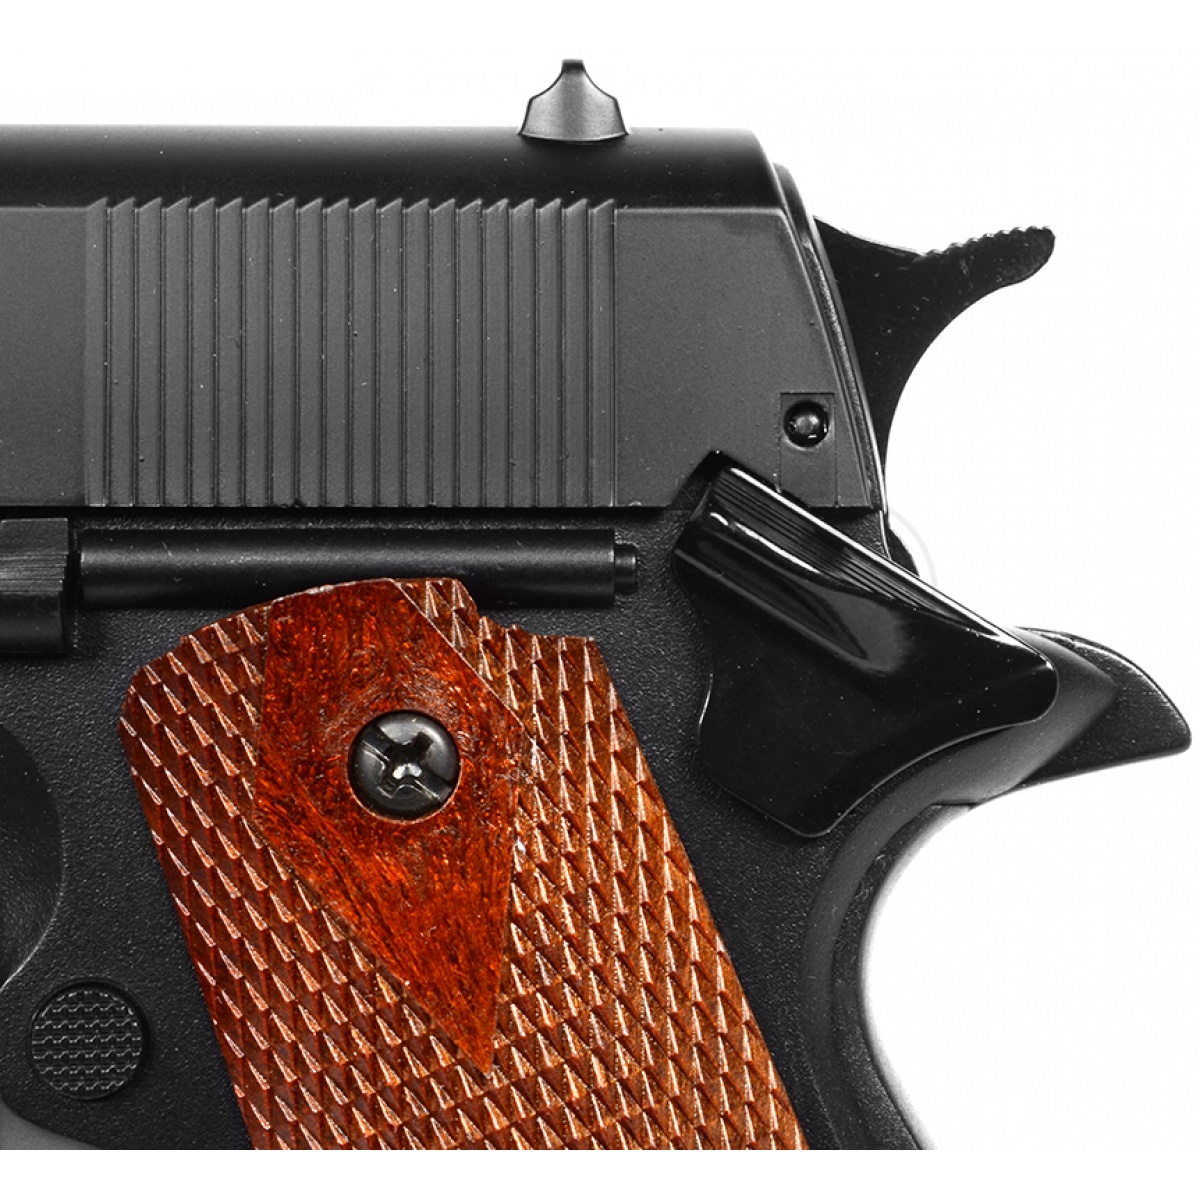 HFC 1911A1 Gas Powered Non-Blow Back Airsoft Pistol